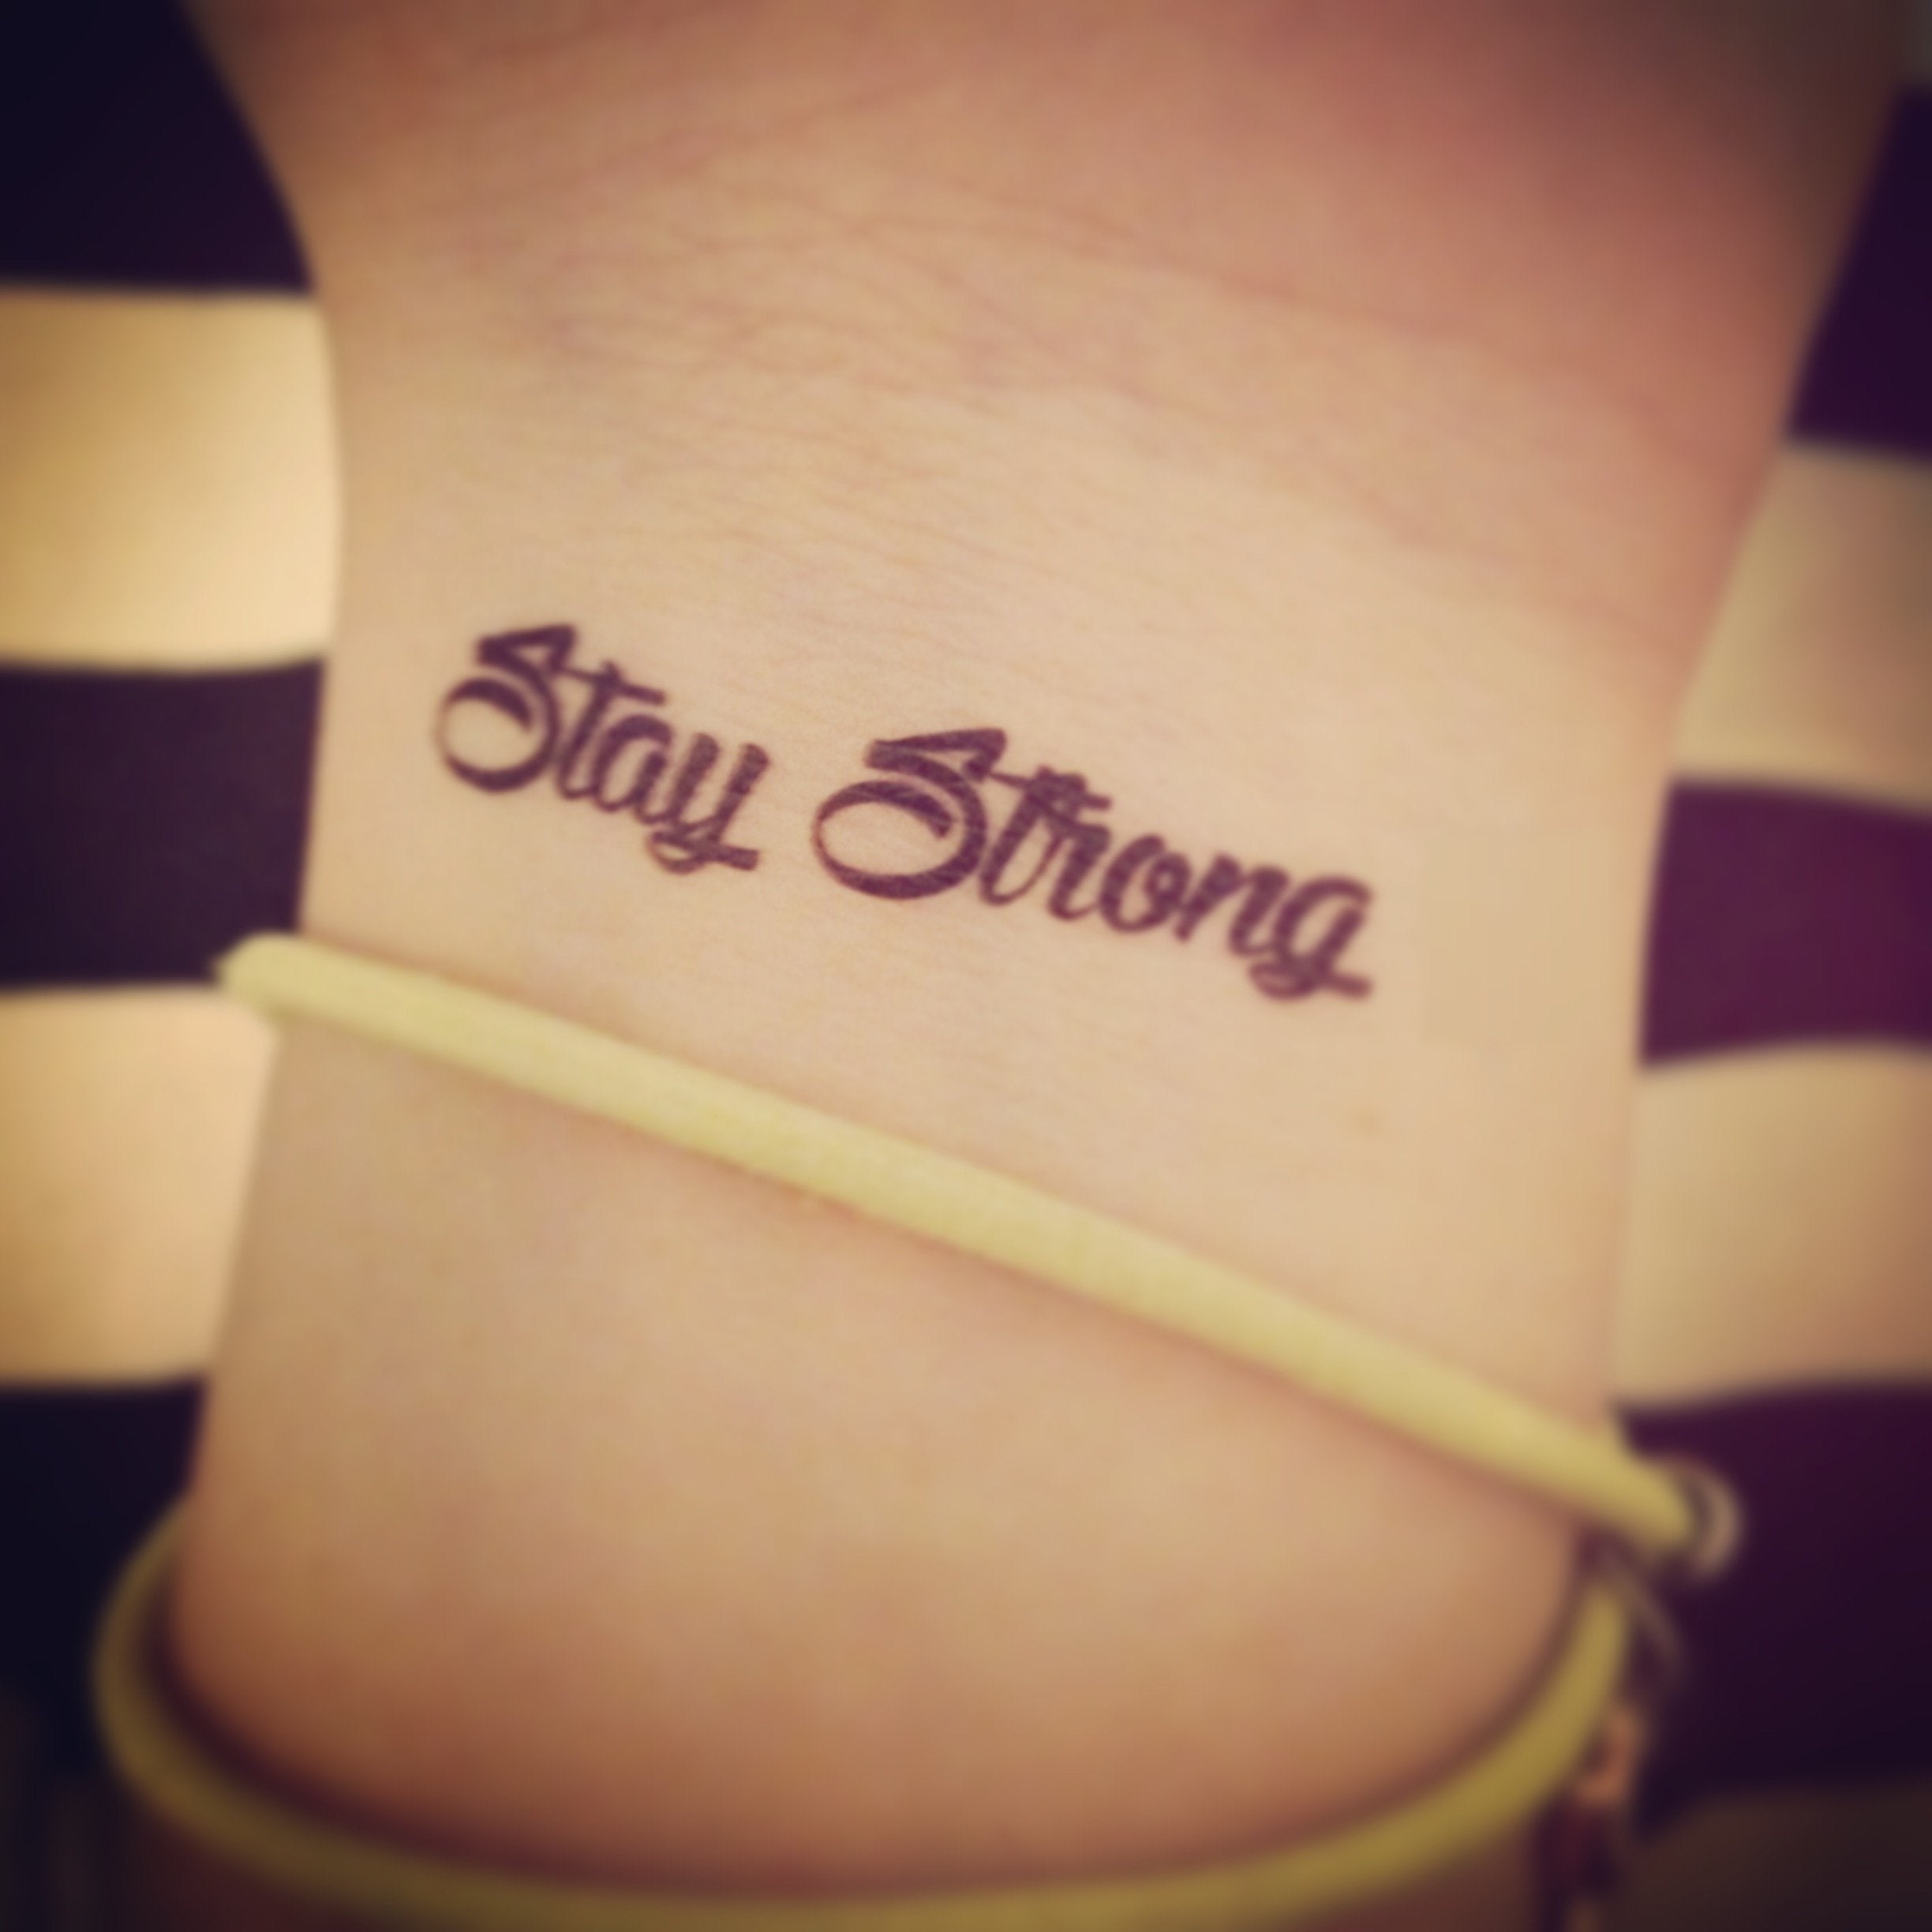 Tattoo design Stay strong